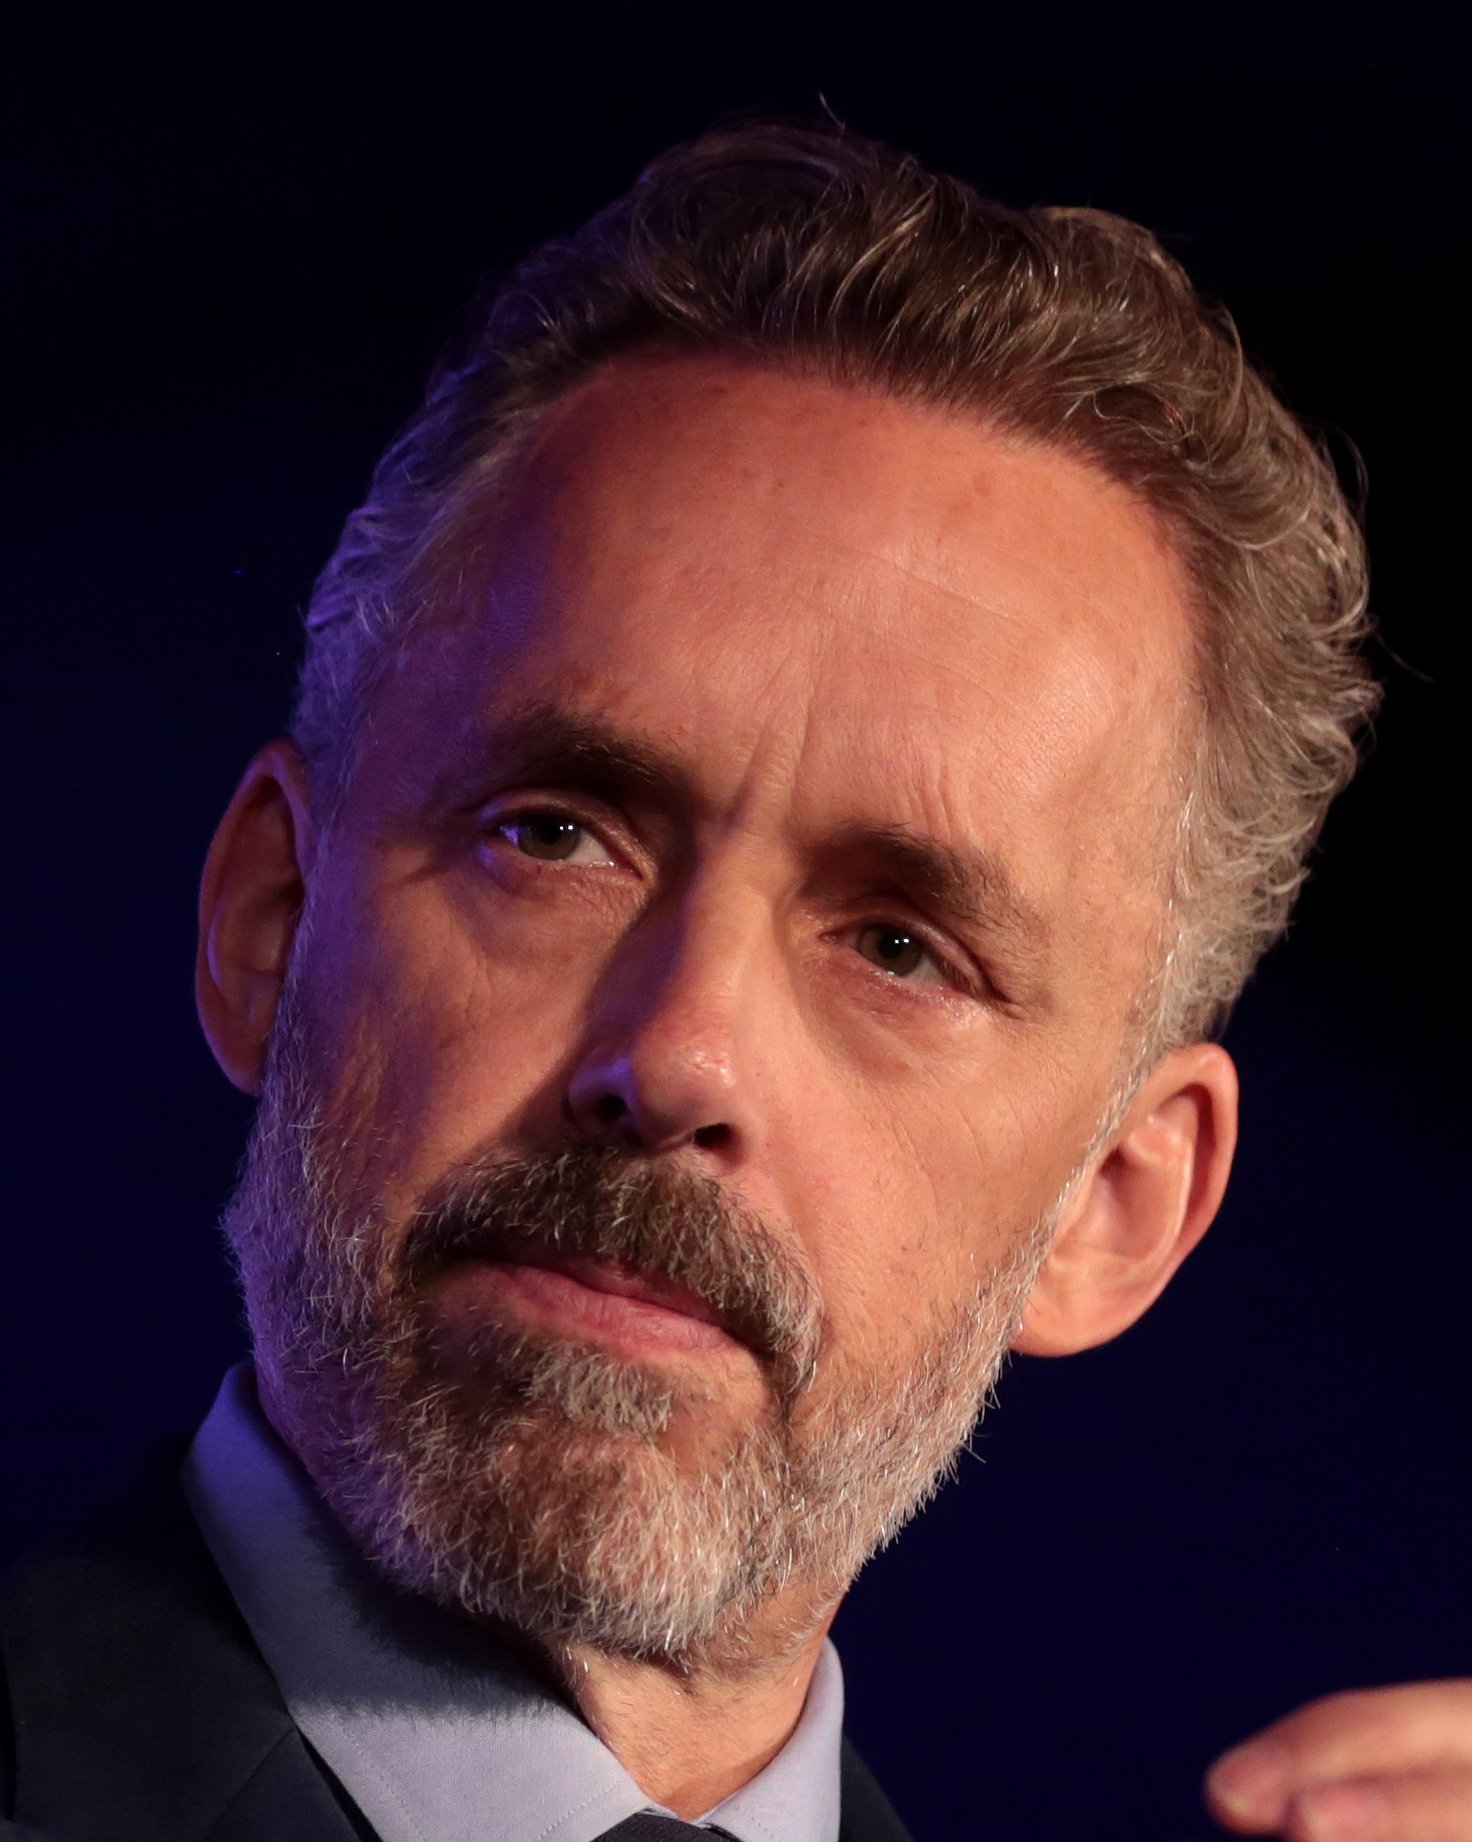 Decoding Dollar Signs and Self-Authoring: Exploring Jordan Peterson’s Net Worth